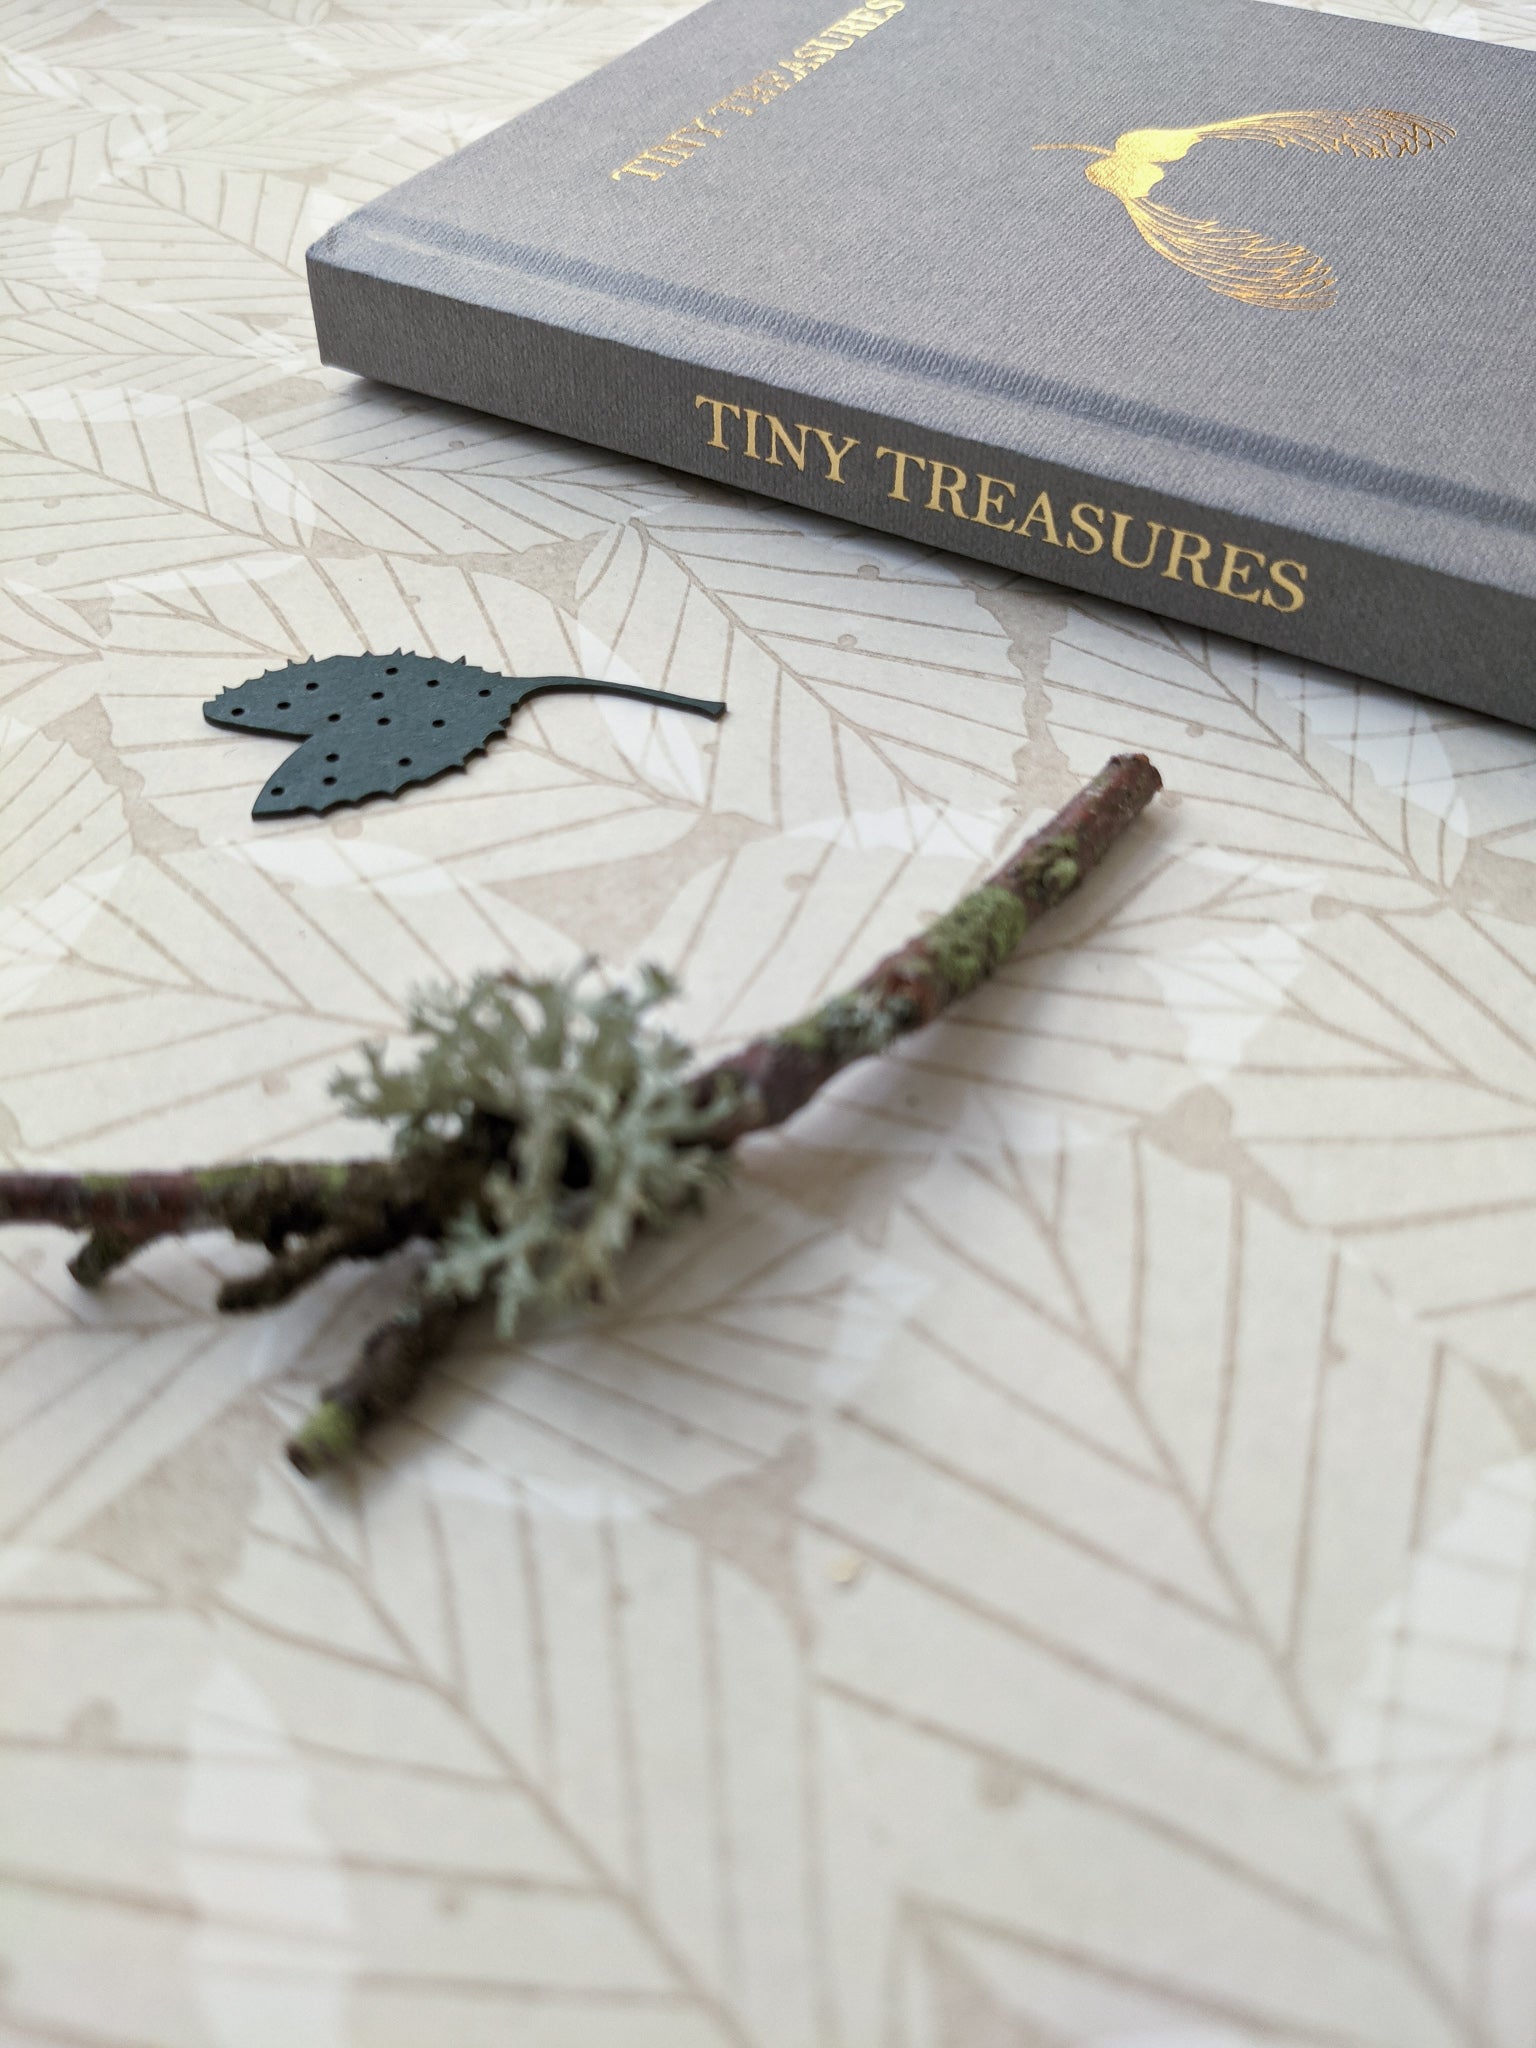 Tiny Treasures book and a twig covered in lichen